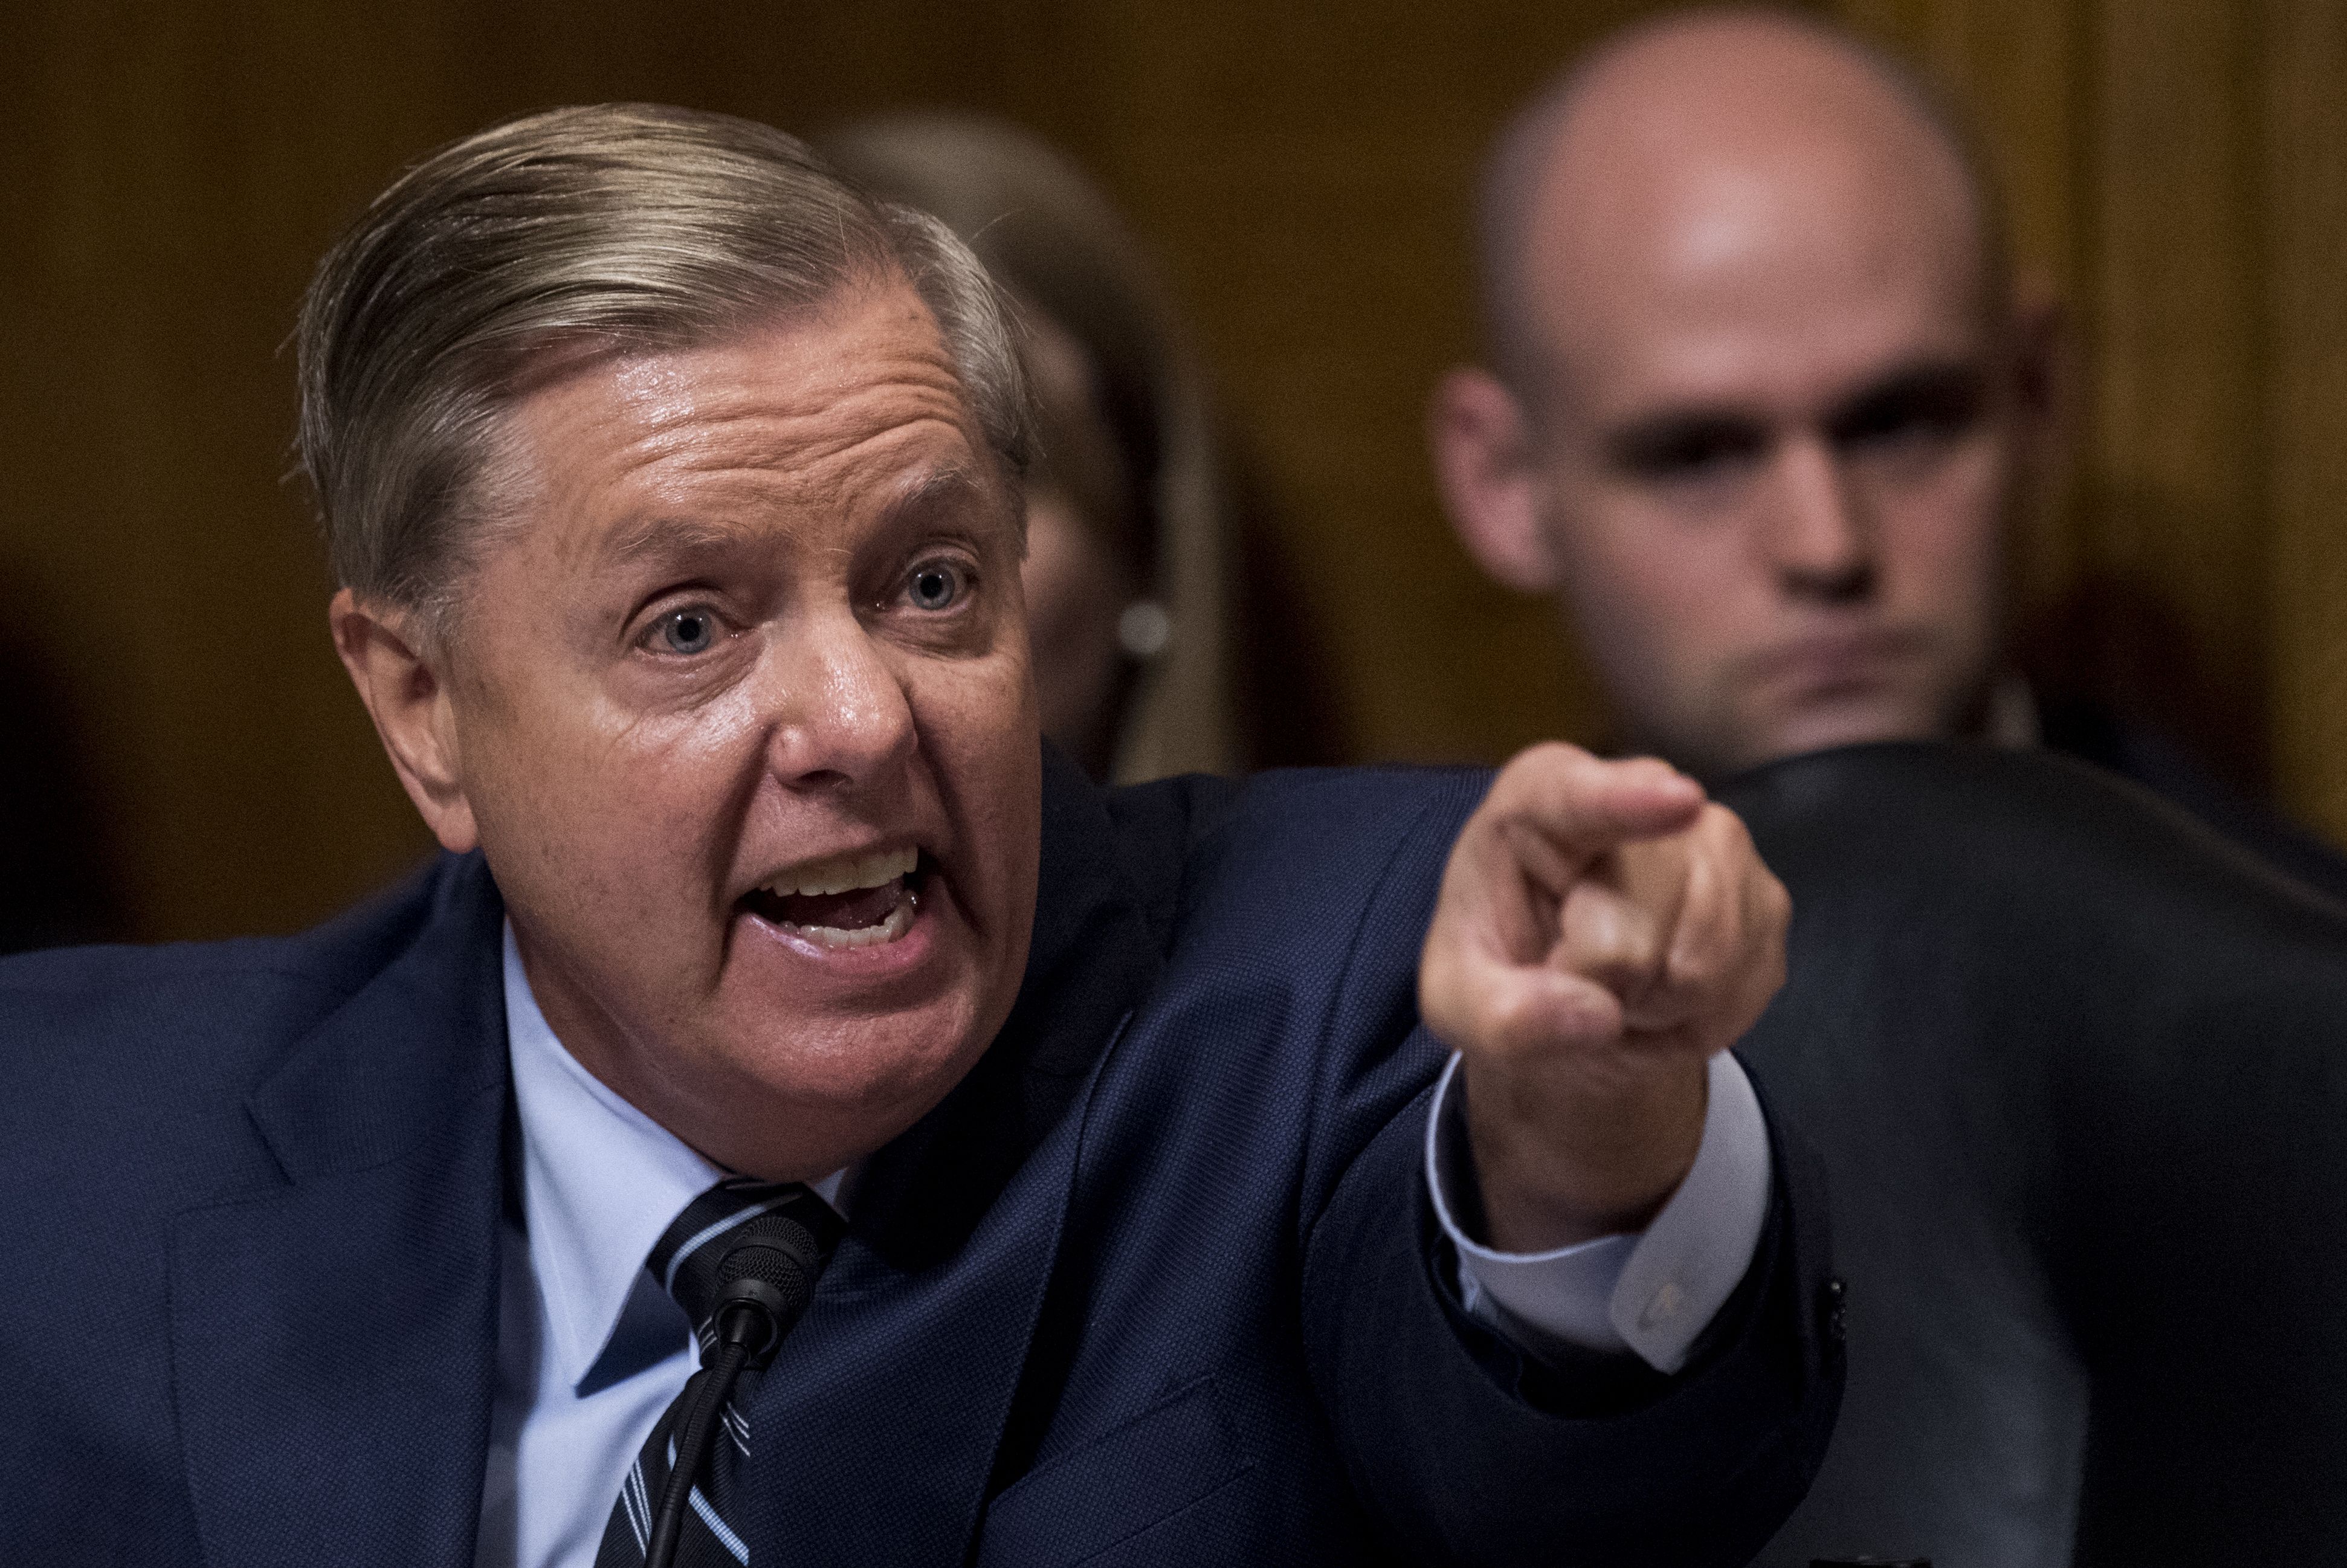 Sen. Lindsey Graham, R-S.C., points at the Democrats as he defends Brett Kavanaugh. Photo: Tom Williams-Pool/Getty Images